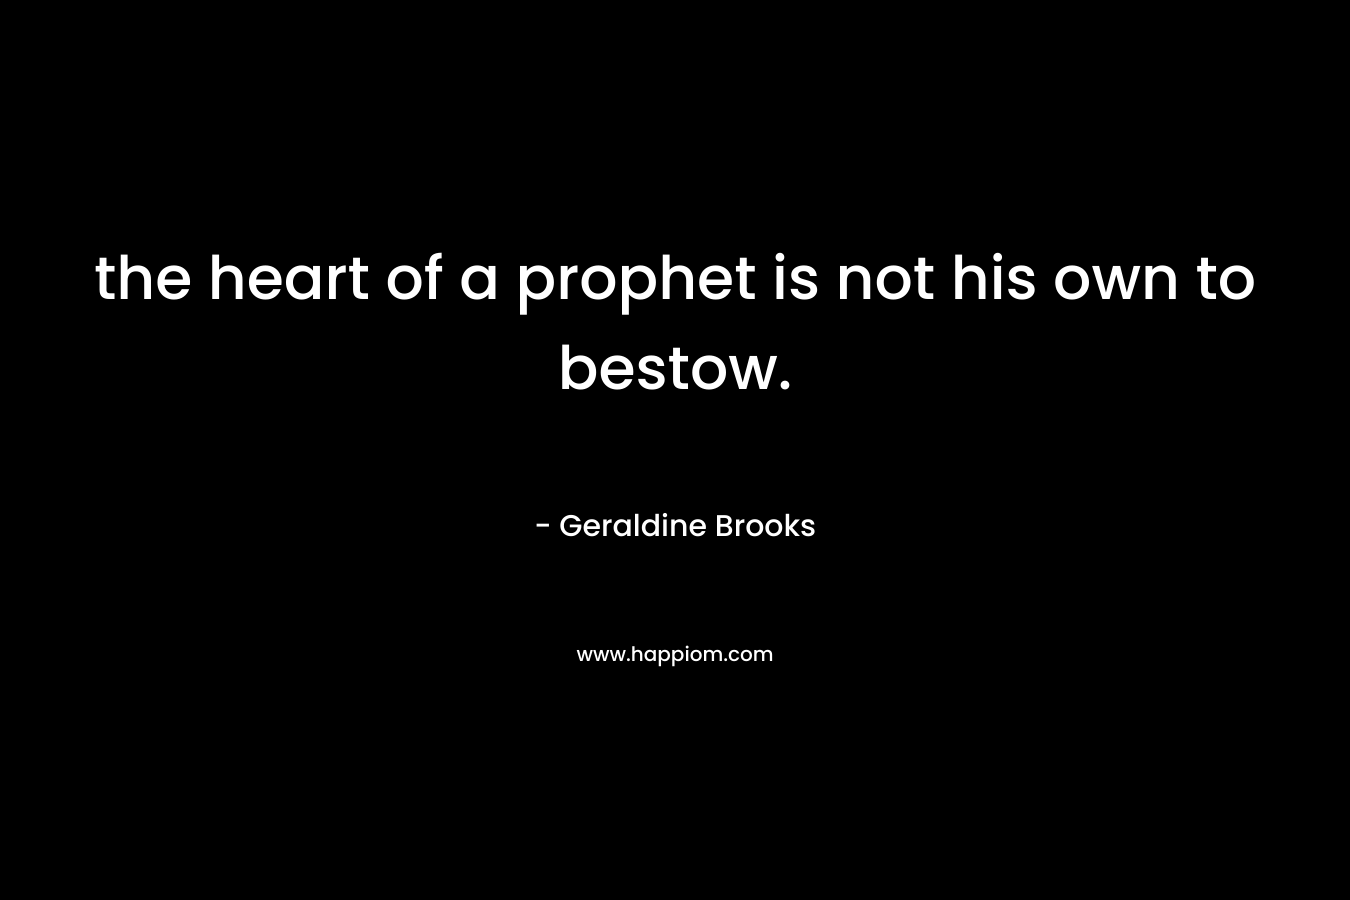 the heart of a prophet is not his own to bestow. – Geraldine Brooks